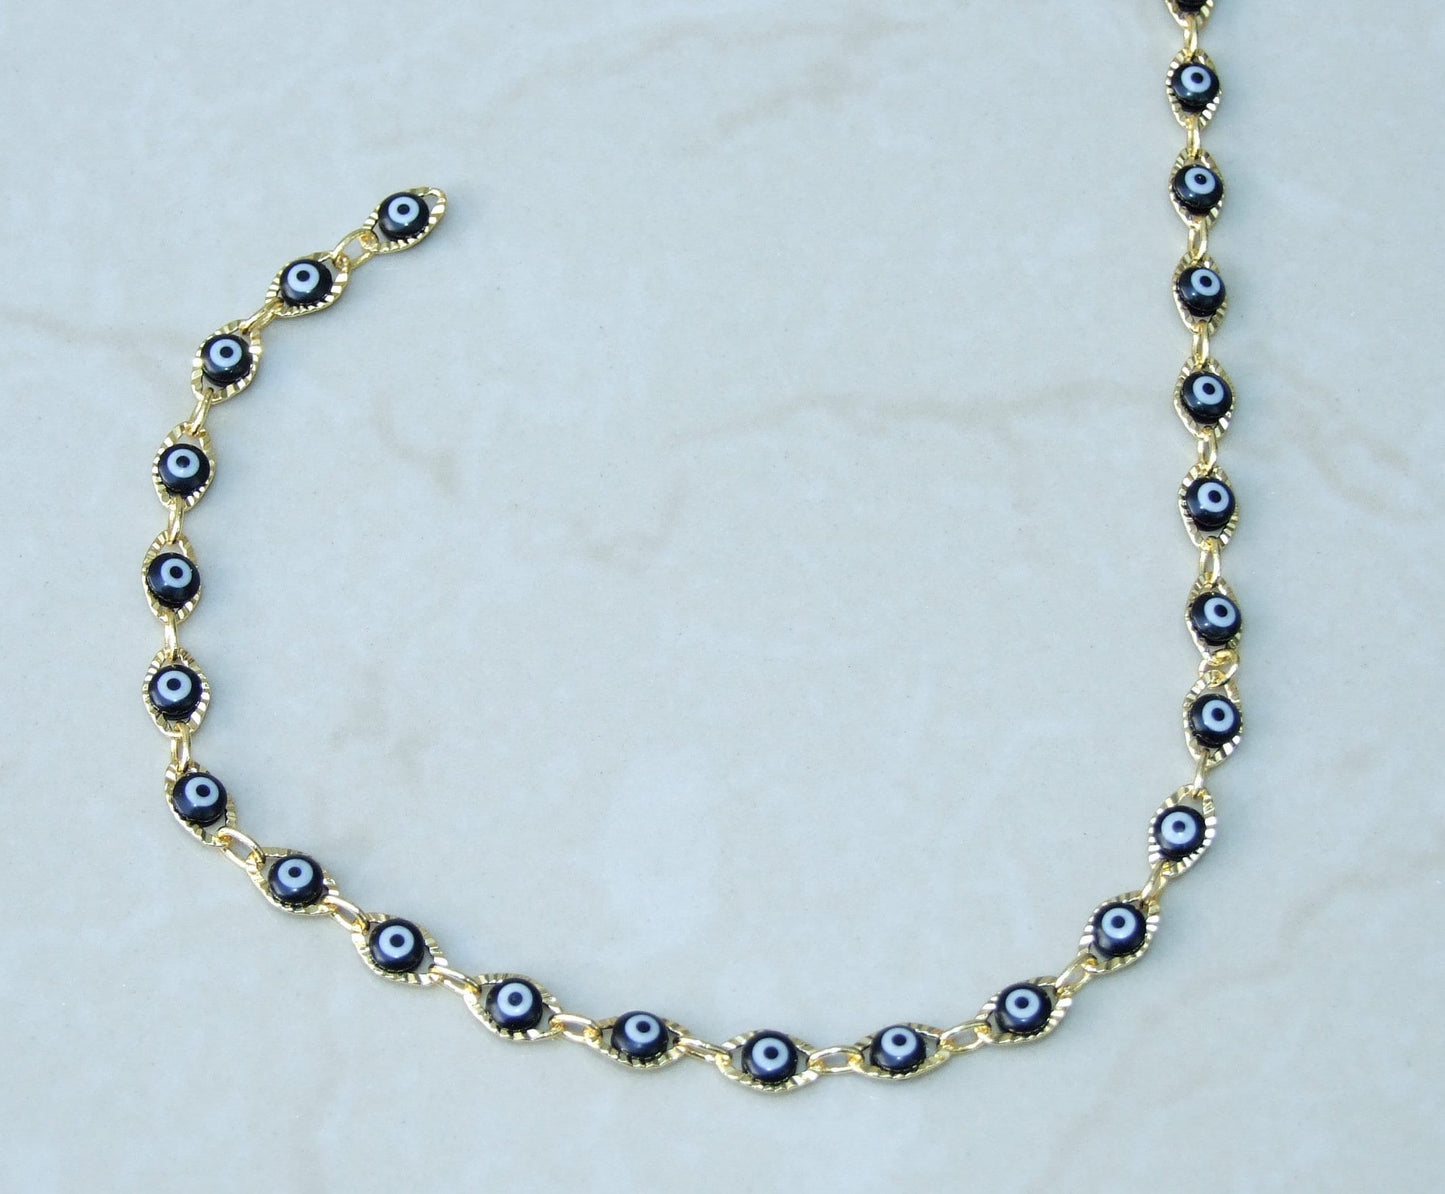 Black Glass Evil Eye Rosary Chain, Bulk Chain, Marquee Bead, Beaded Chain, Body Chain Jewelry, Gold Chain, Necklace Chain, Belly Chain